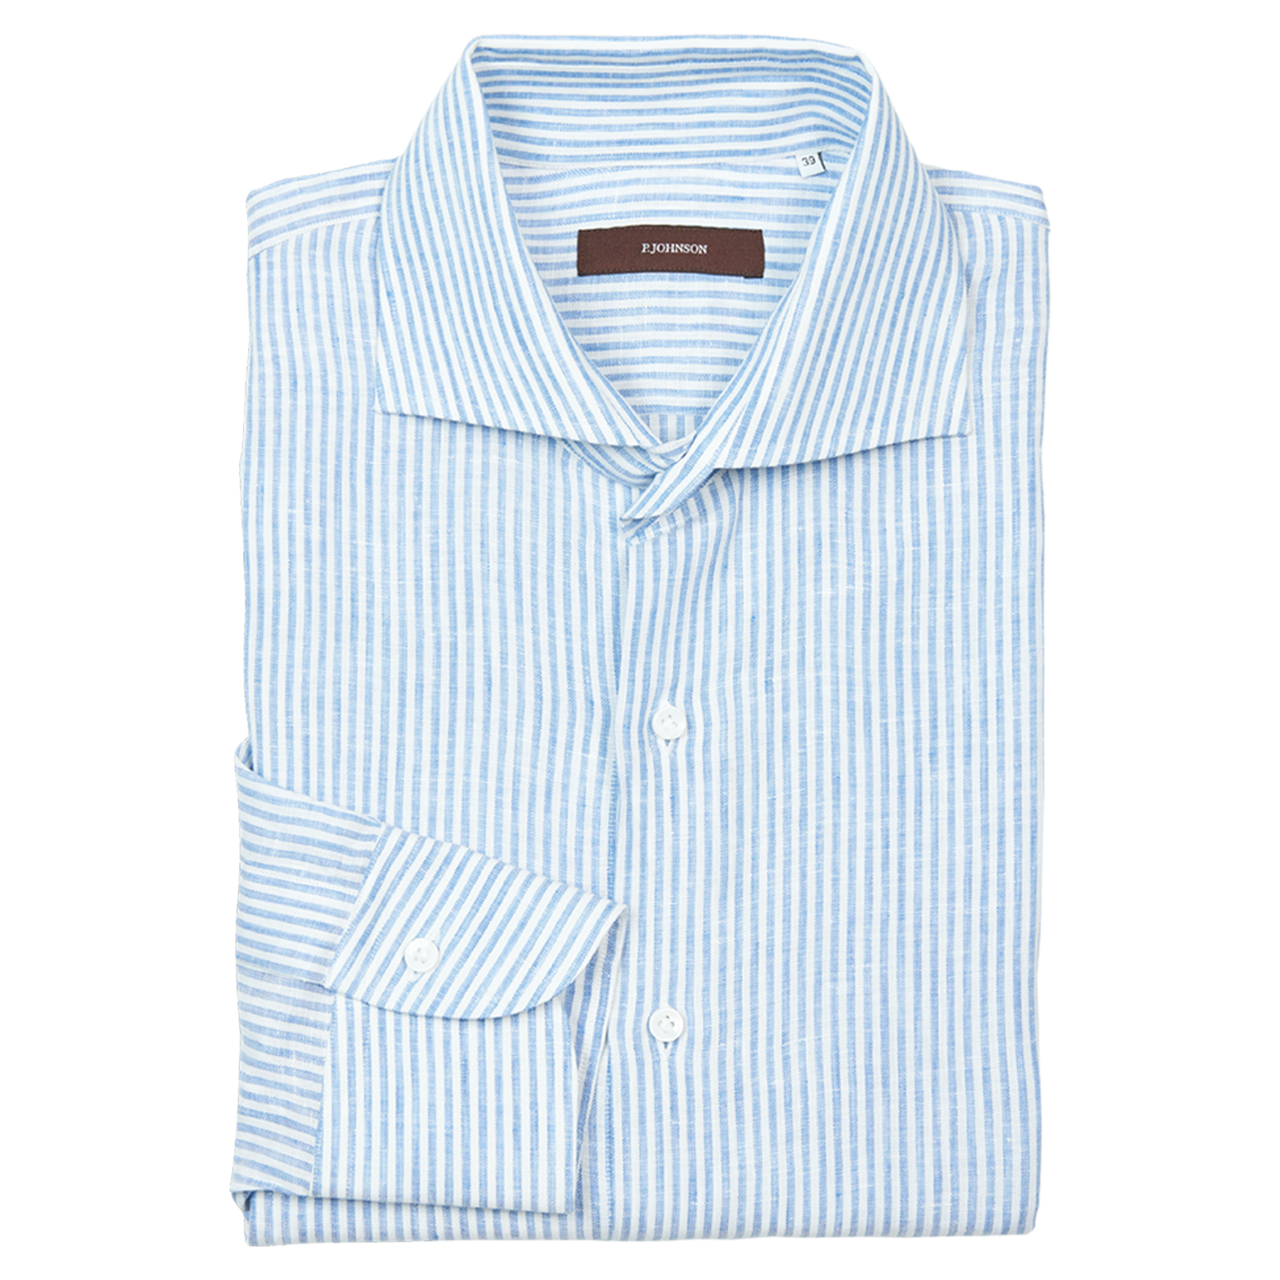 P. Johnson Shirt in Blue and White Stripe Linen with Spread Collar